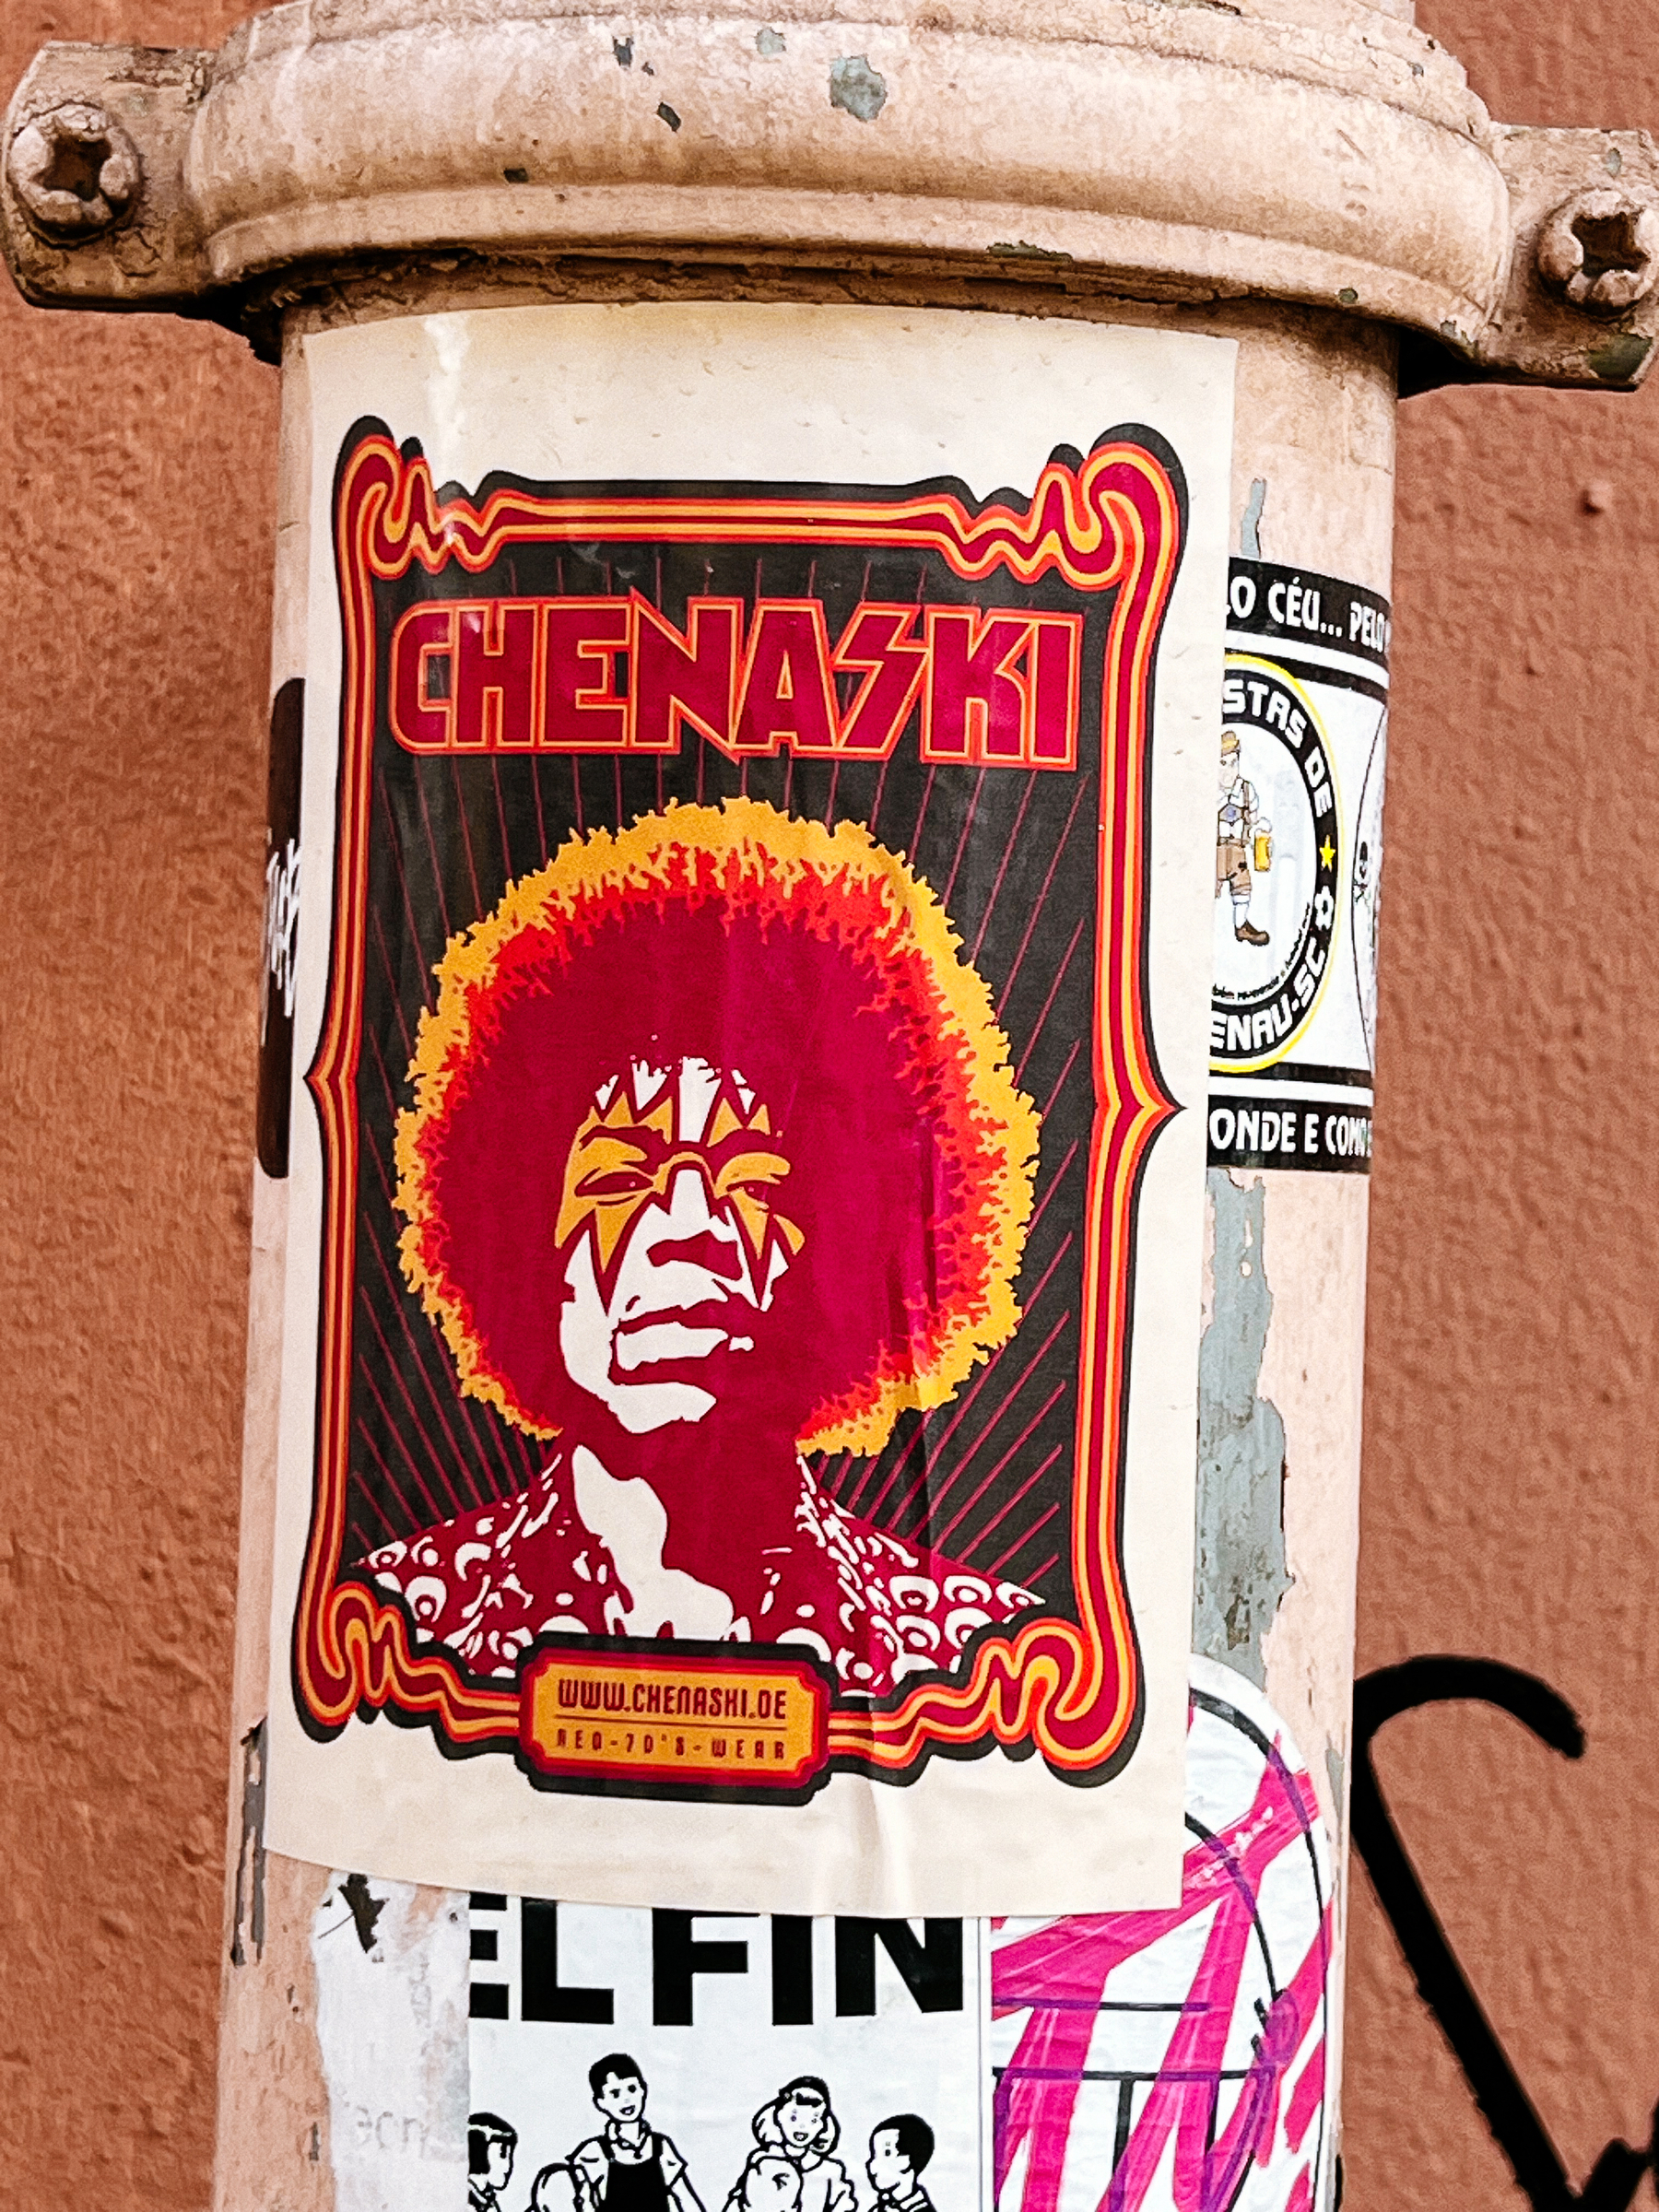 “chenaski”, and a cool looking, Afro hair sporting, eye painted dude. 